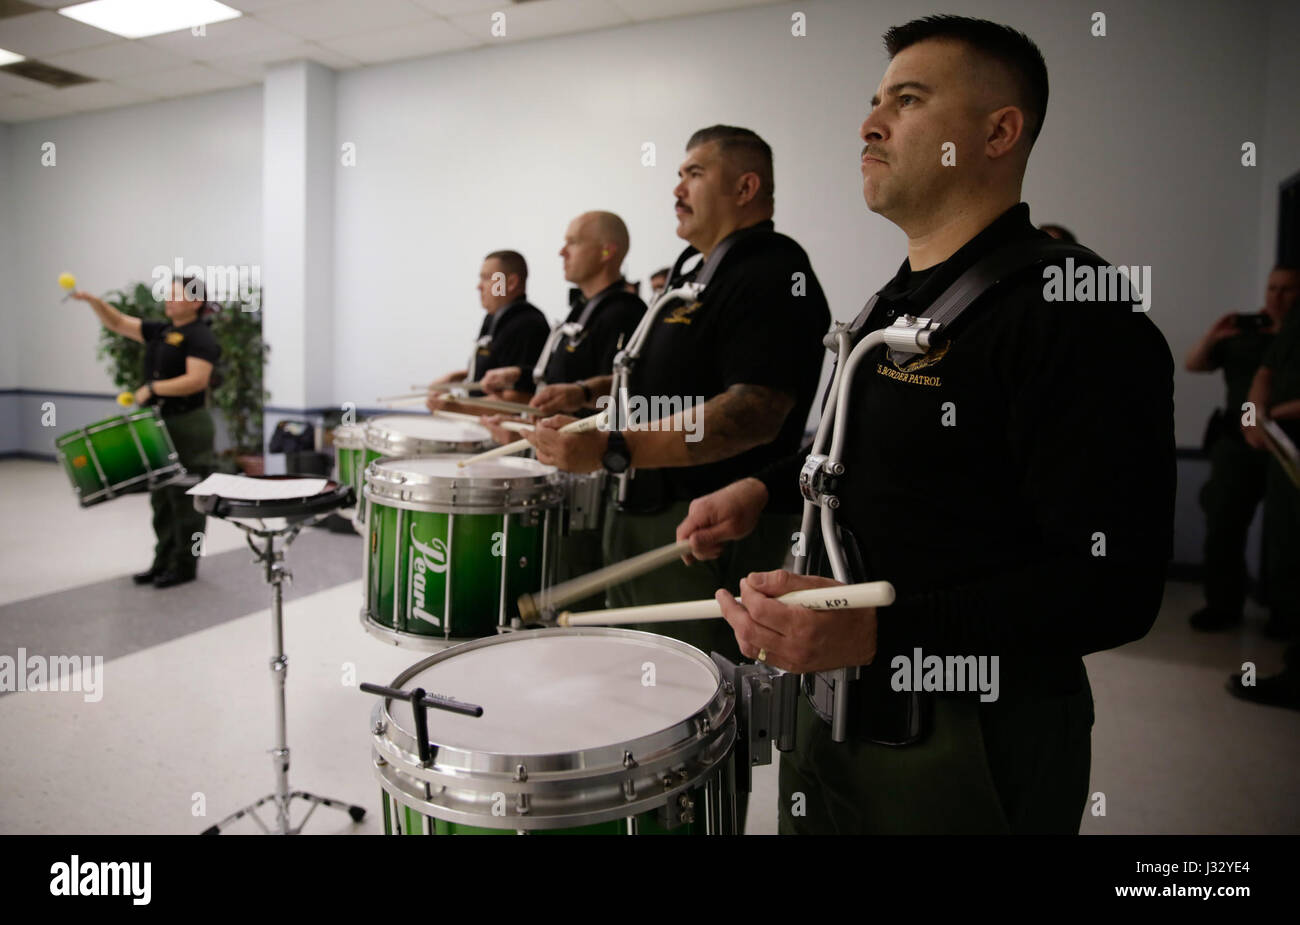 Members of the U.S. Border Patrol Pipes and Drums Band rehearse at the Woodbridge Elks Lodge in Dale City, Va., January 18, 2017, in preparation for the inauguration of the 45th President, Donald J. Trump. U.S. Customs and Border Protection Photo by Glenn Fawcett Stock Photo